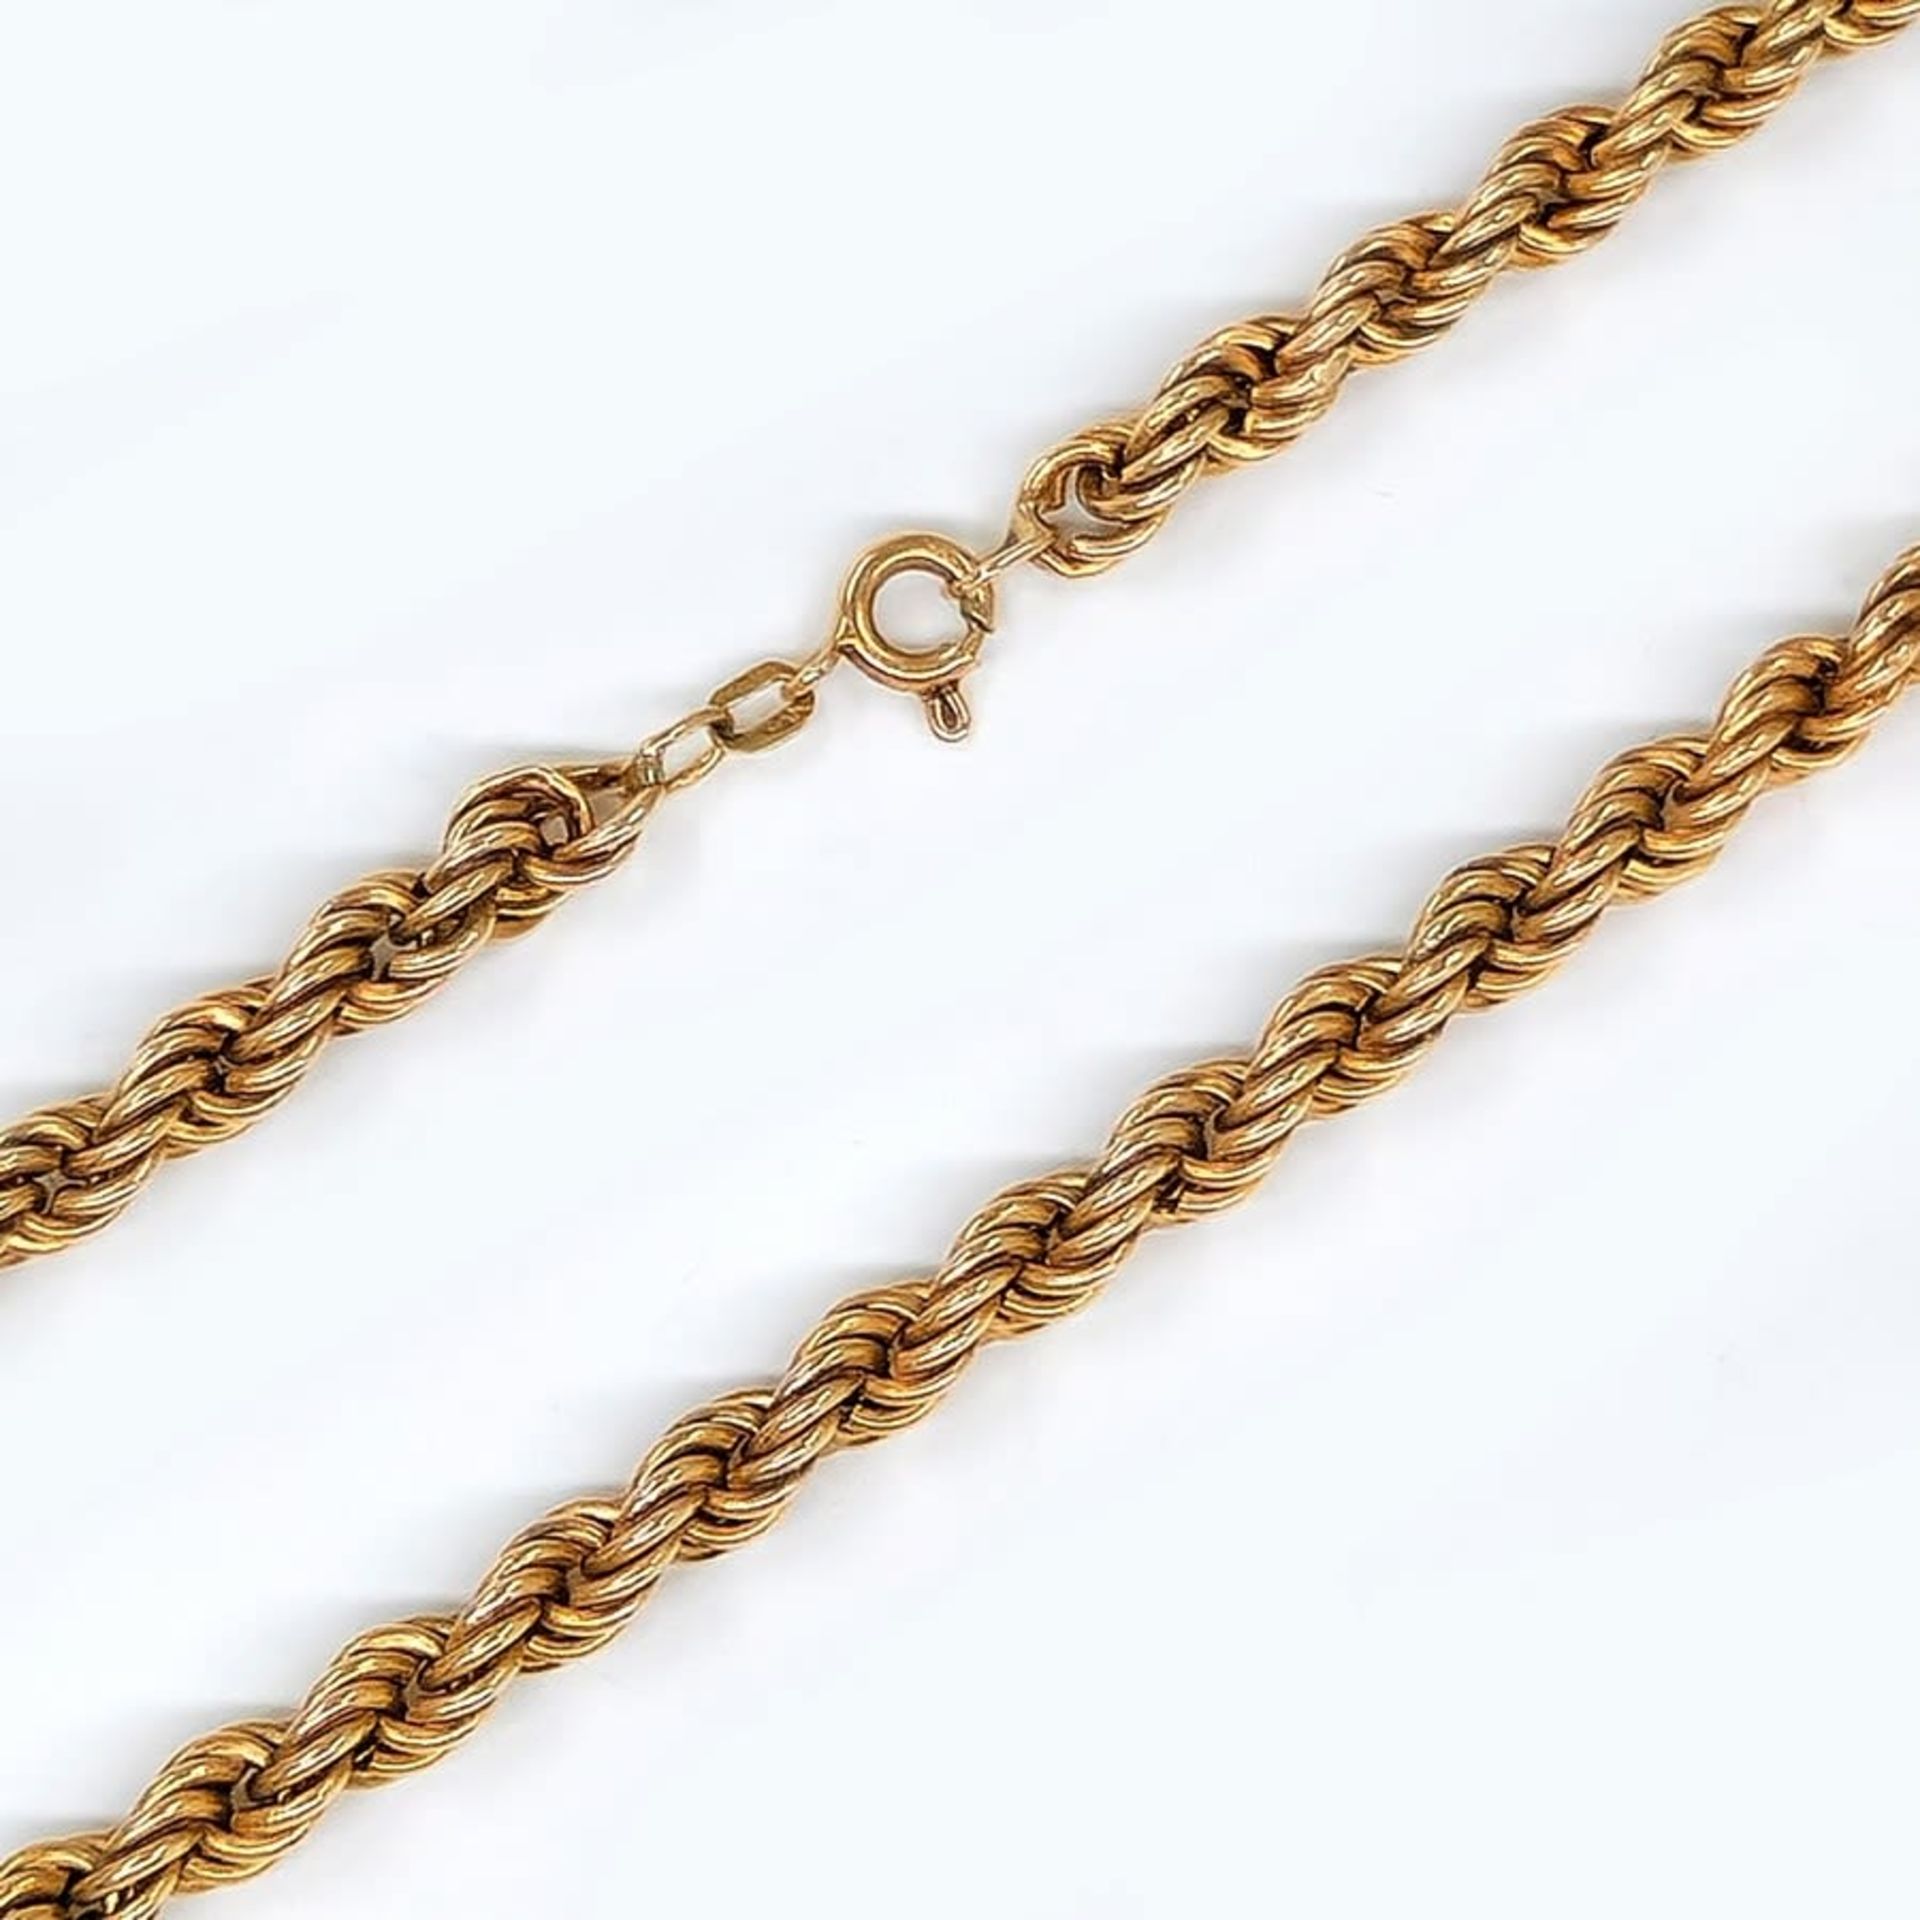 Necklace 14K yellow gold, signed, Length: 46 cm, Weight: 15.54 grams. - Image 2 of 3